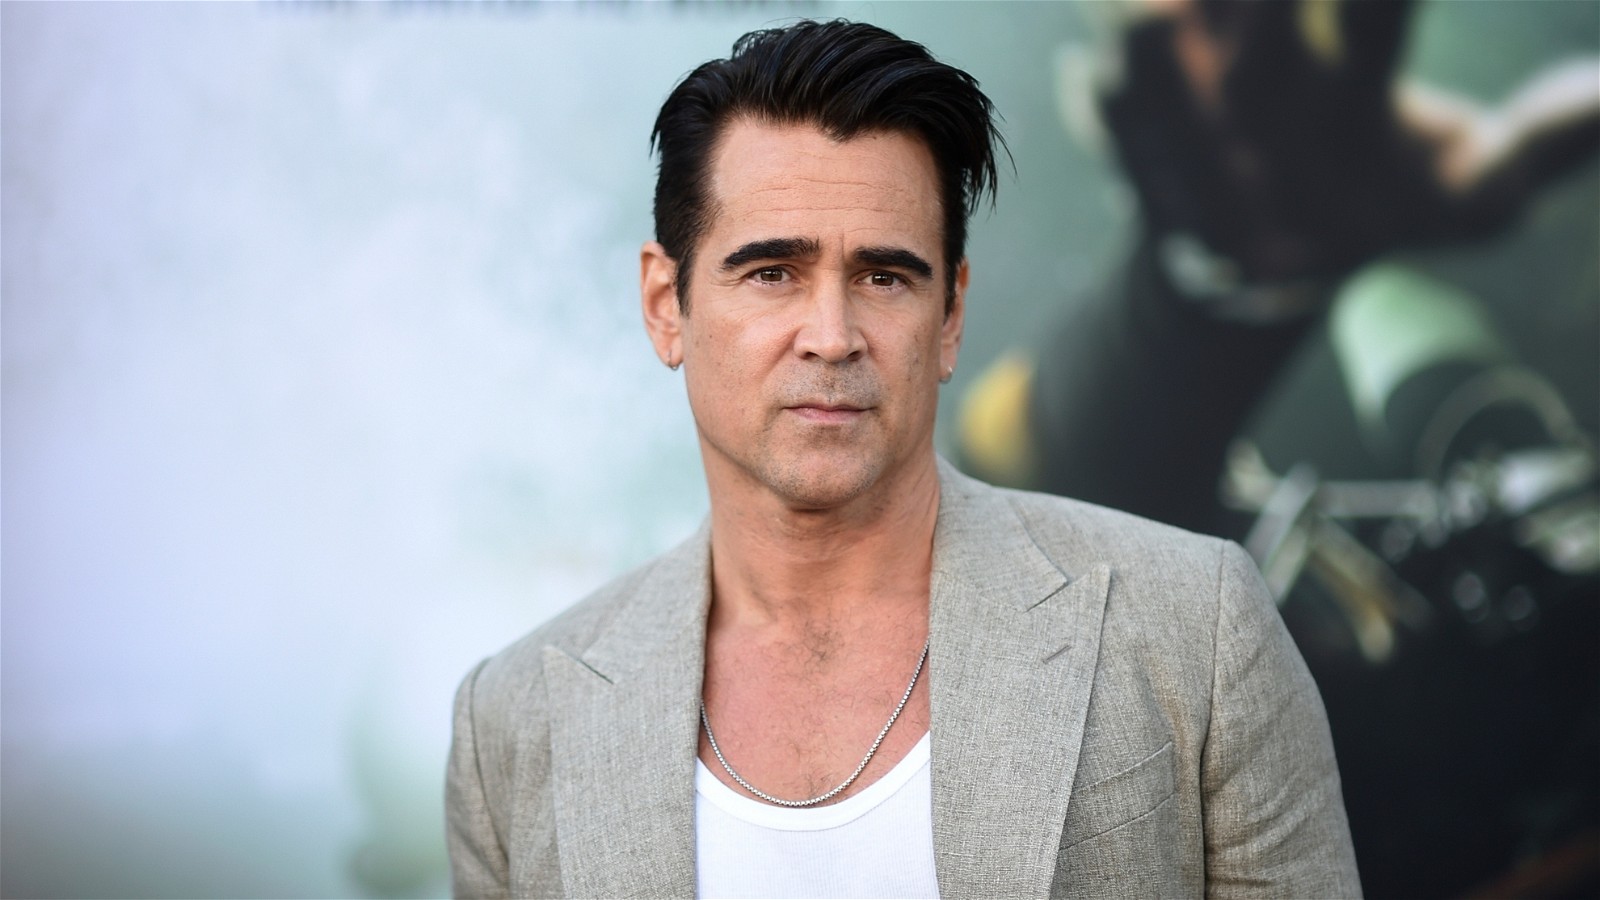 Colin Farrell has been known for many movies.